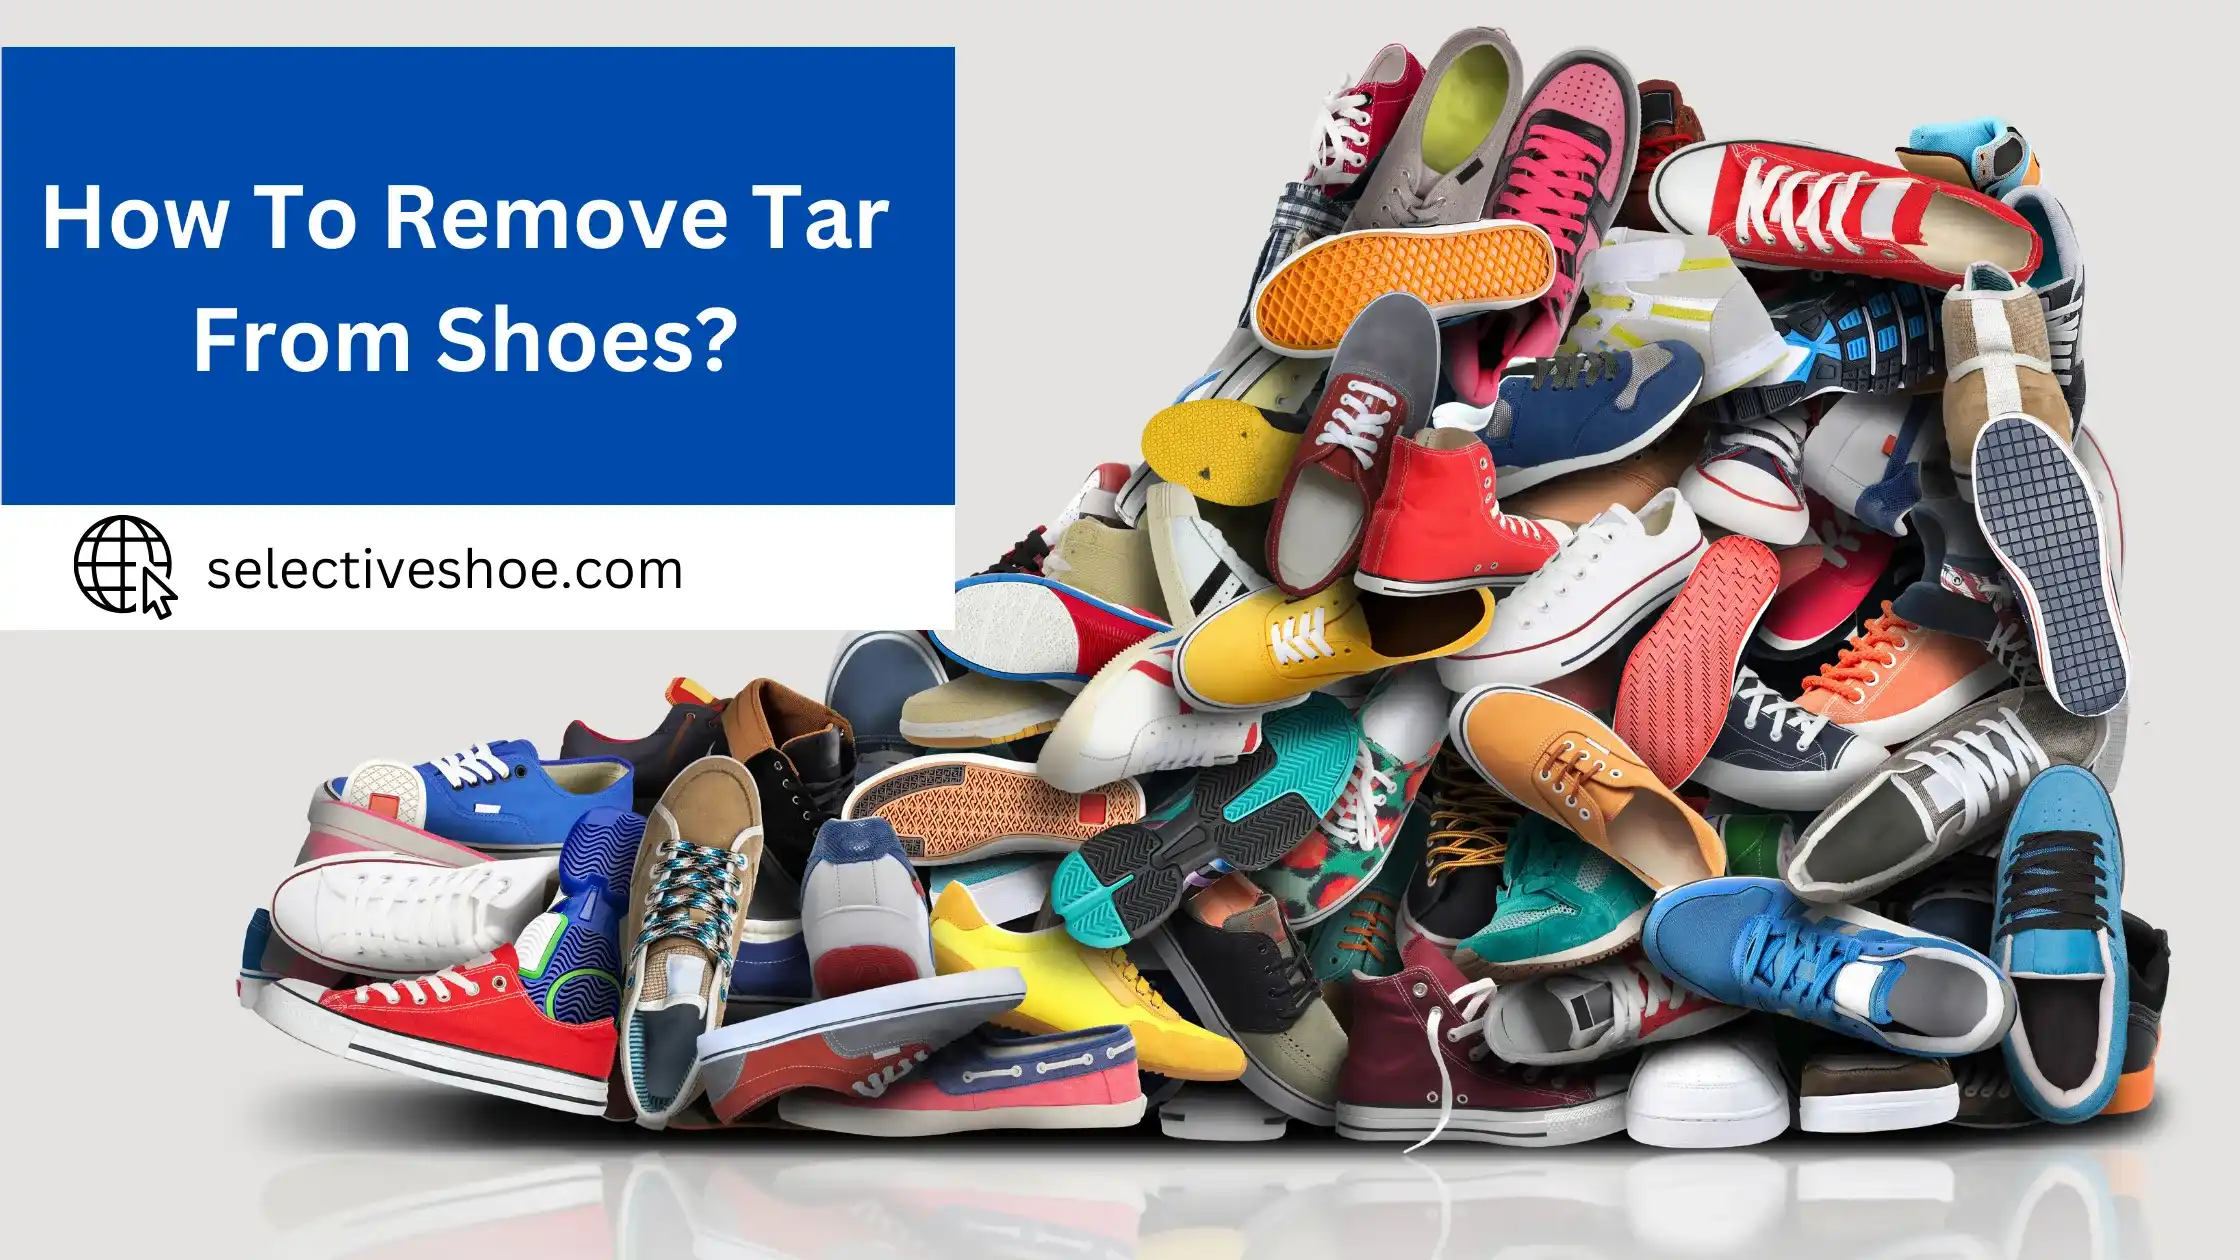 How To Remove Tar From Shoes? Quick And Effective Tips